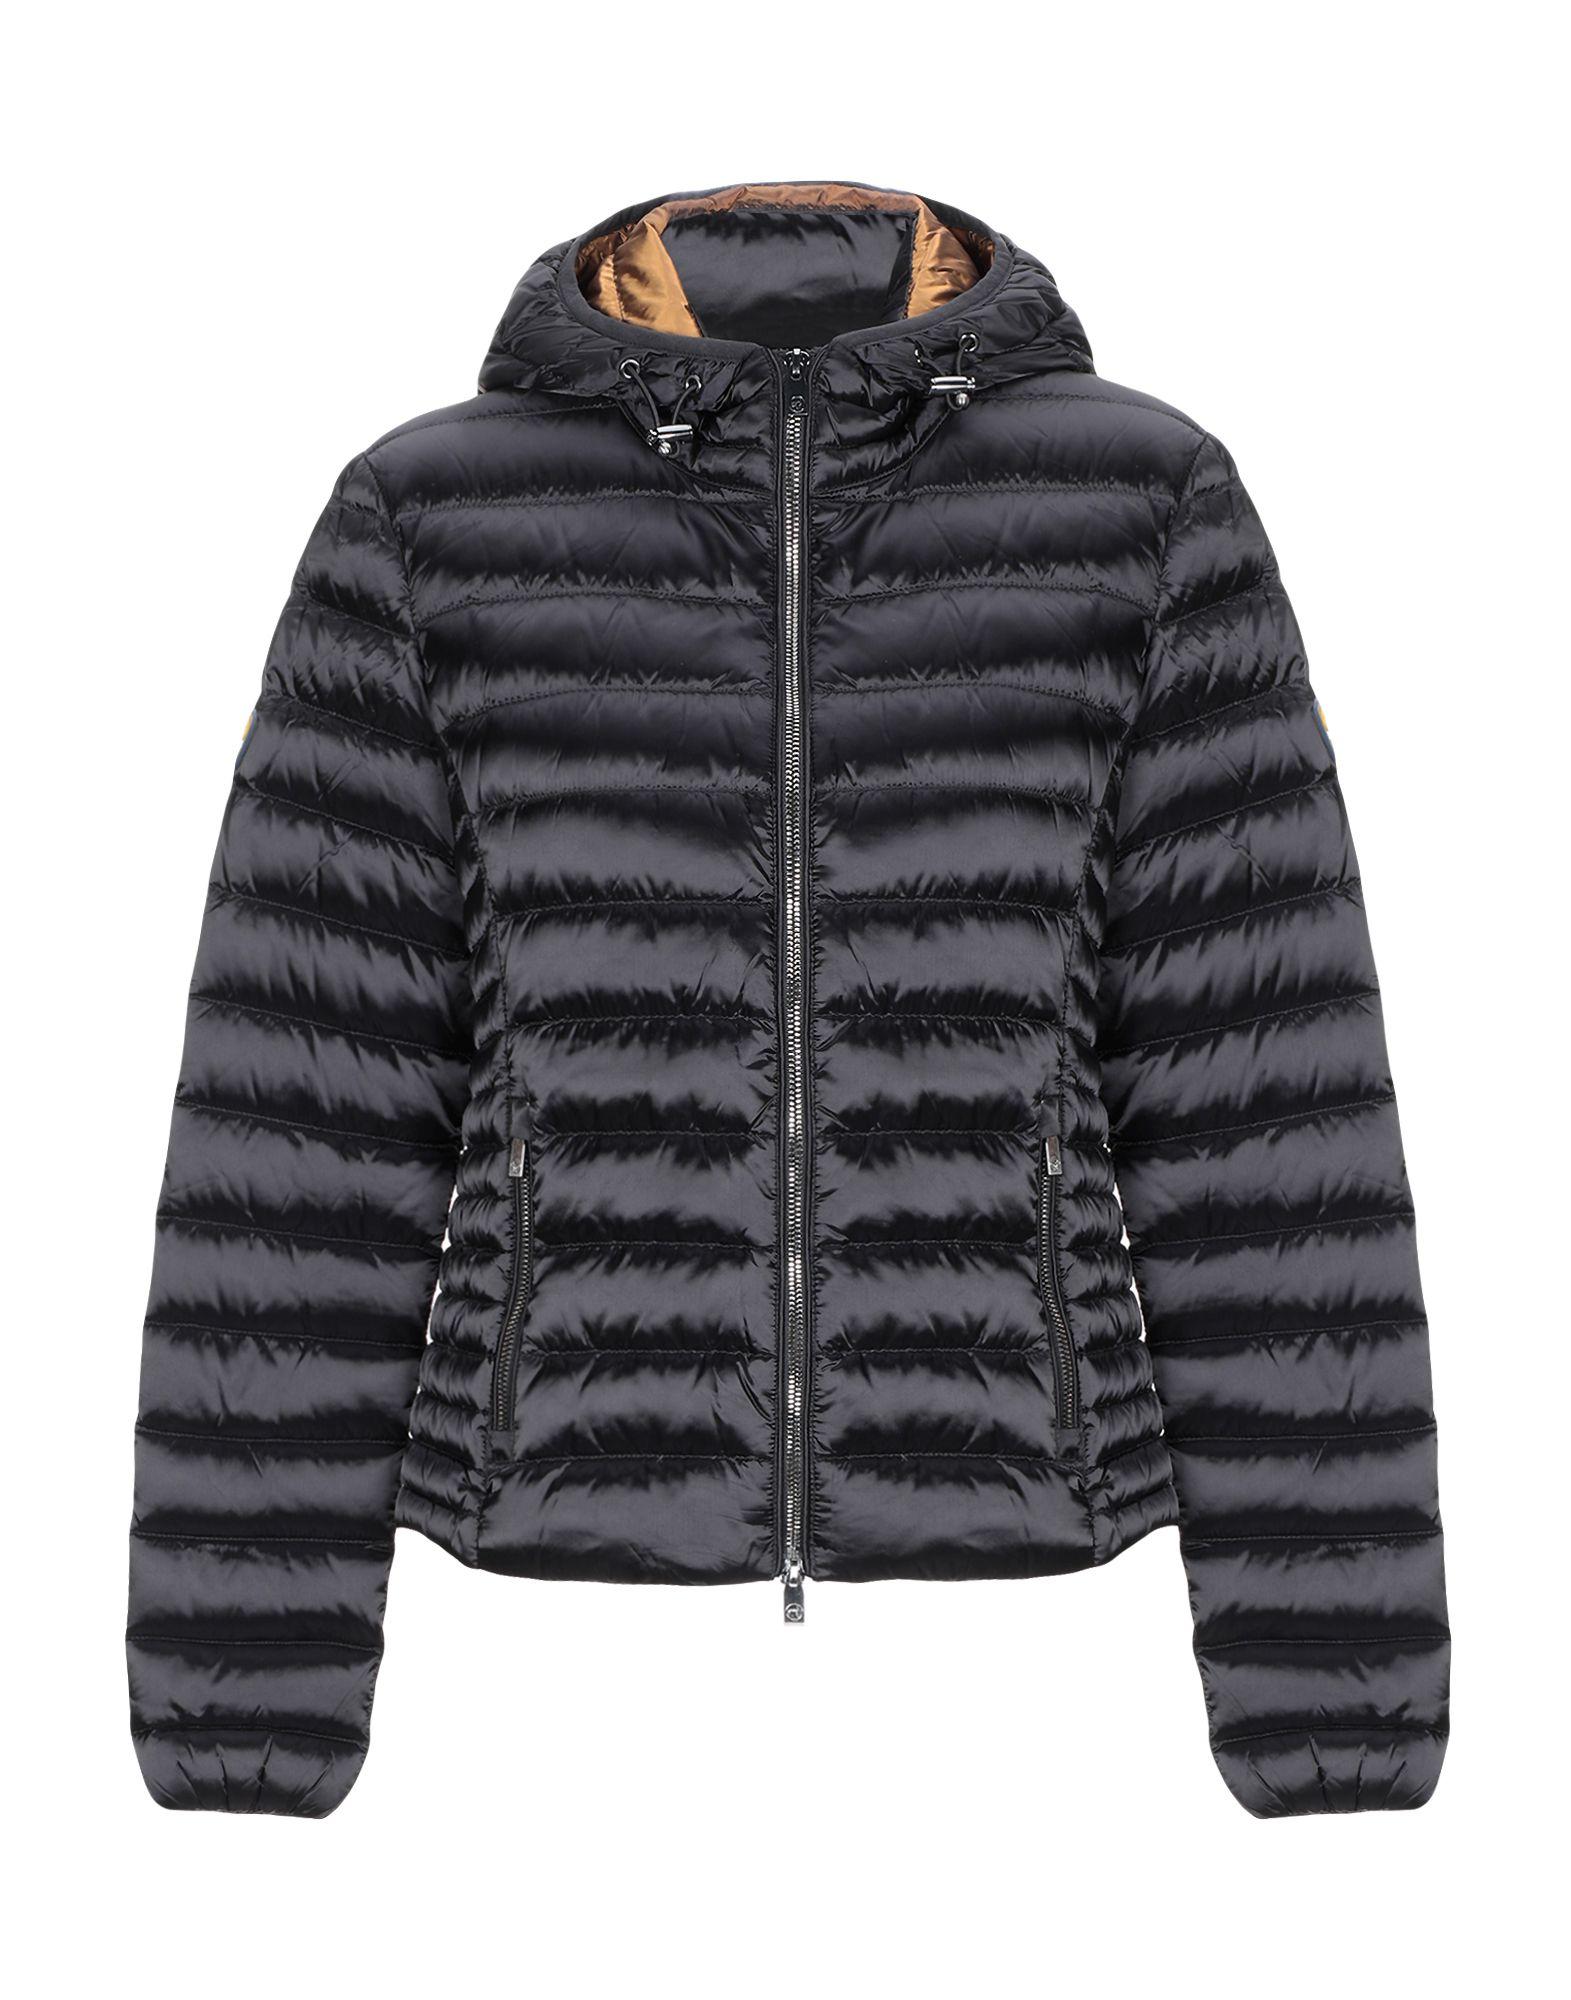 Ciesse Piumini Synthetic Down Jacket in Black - Lyst